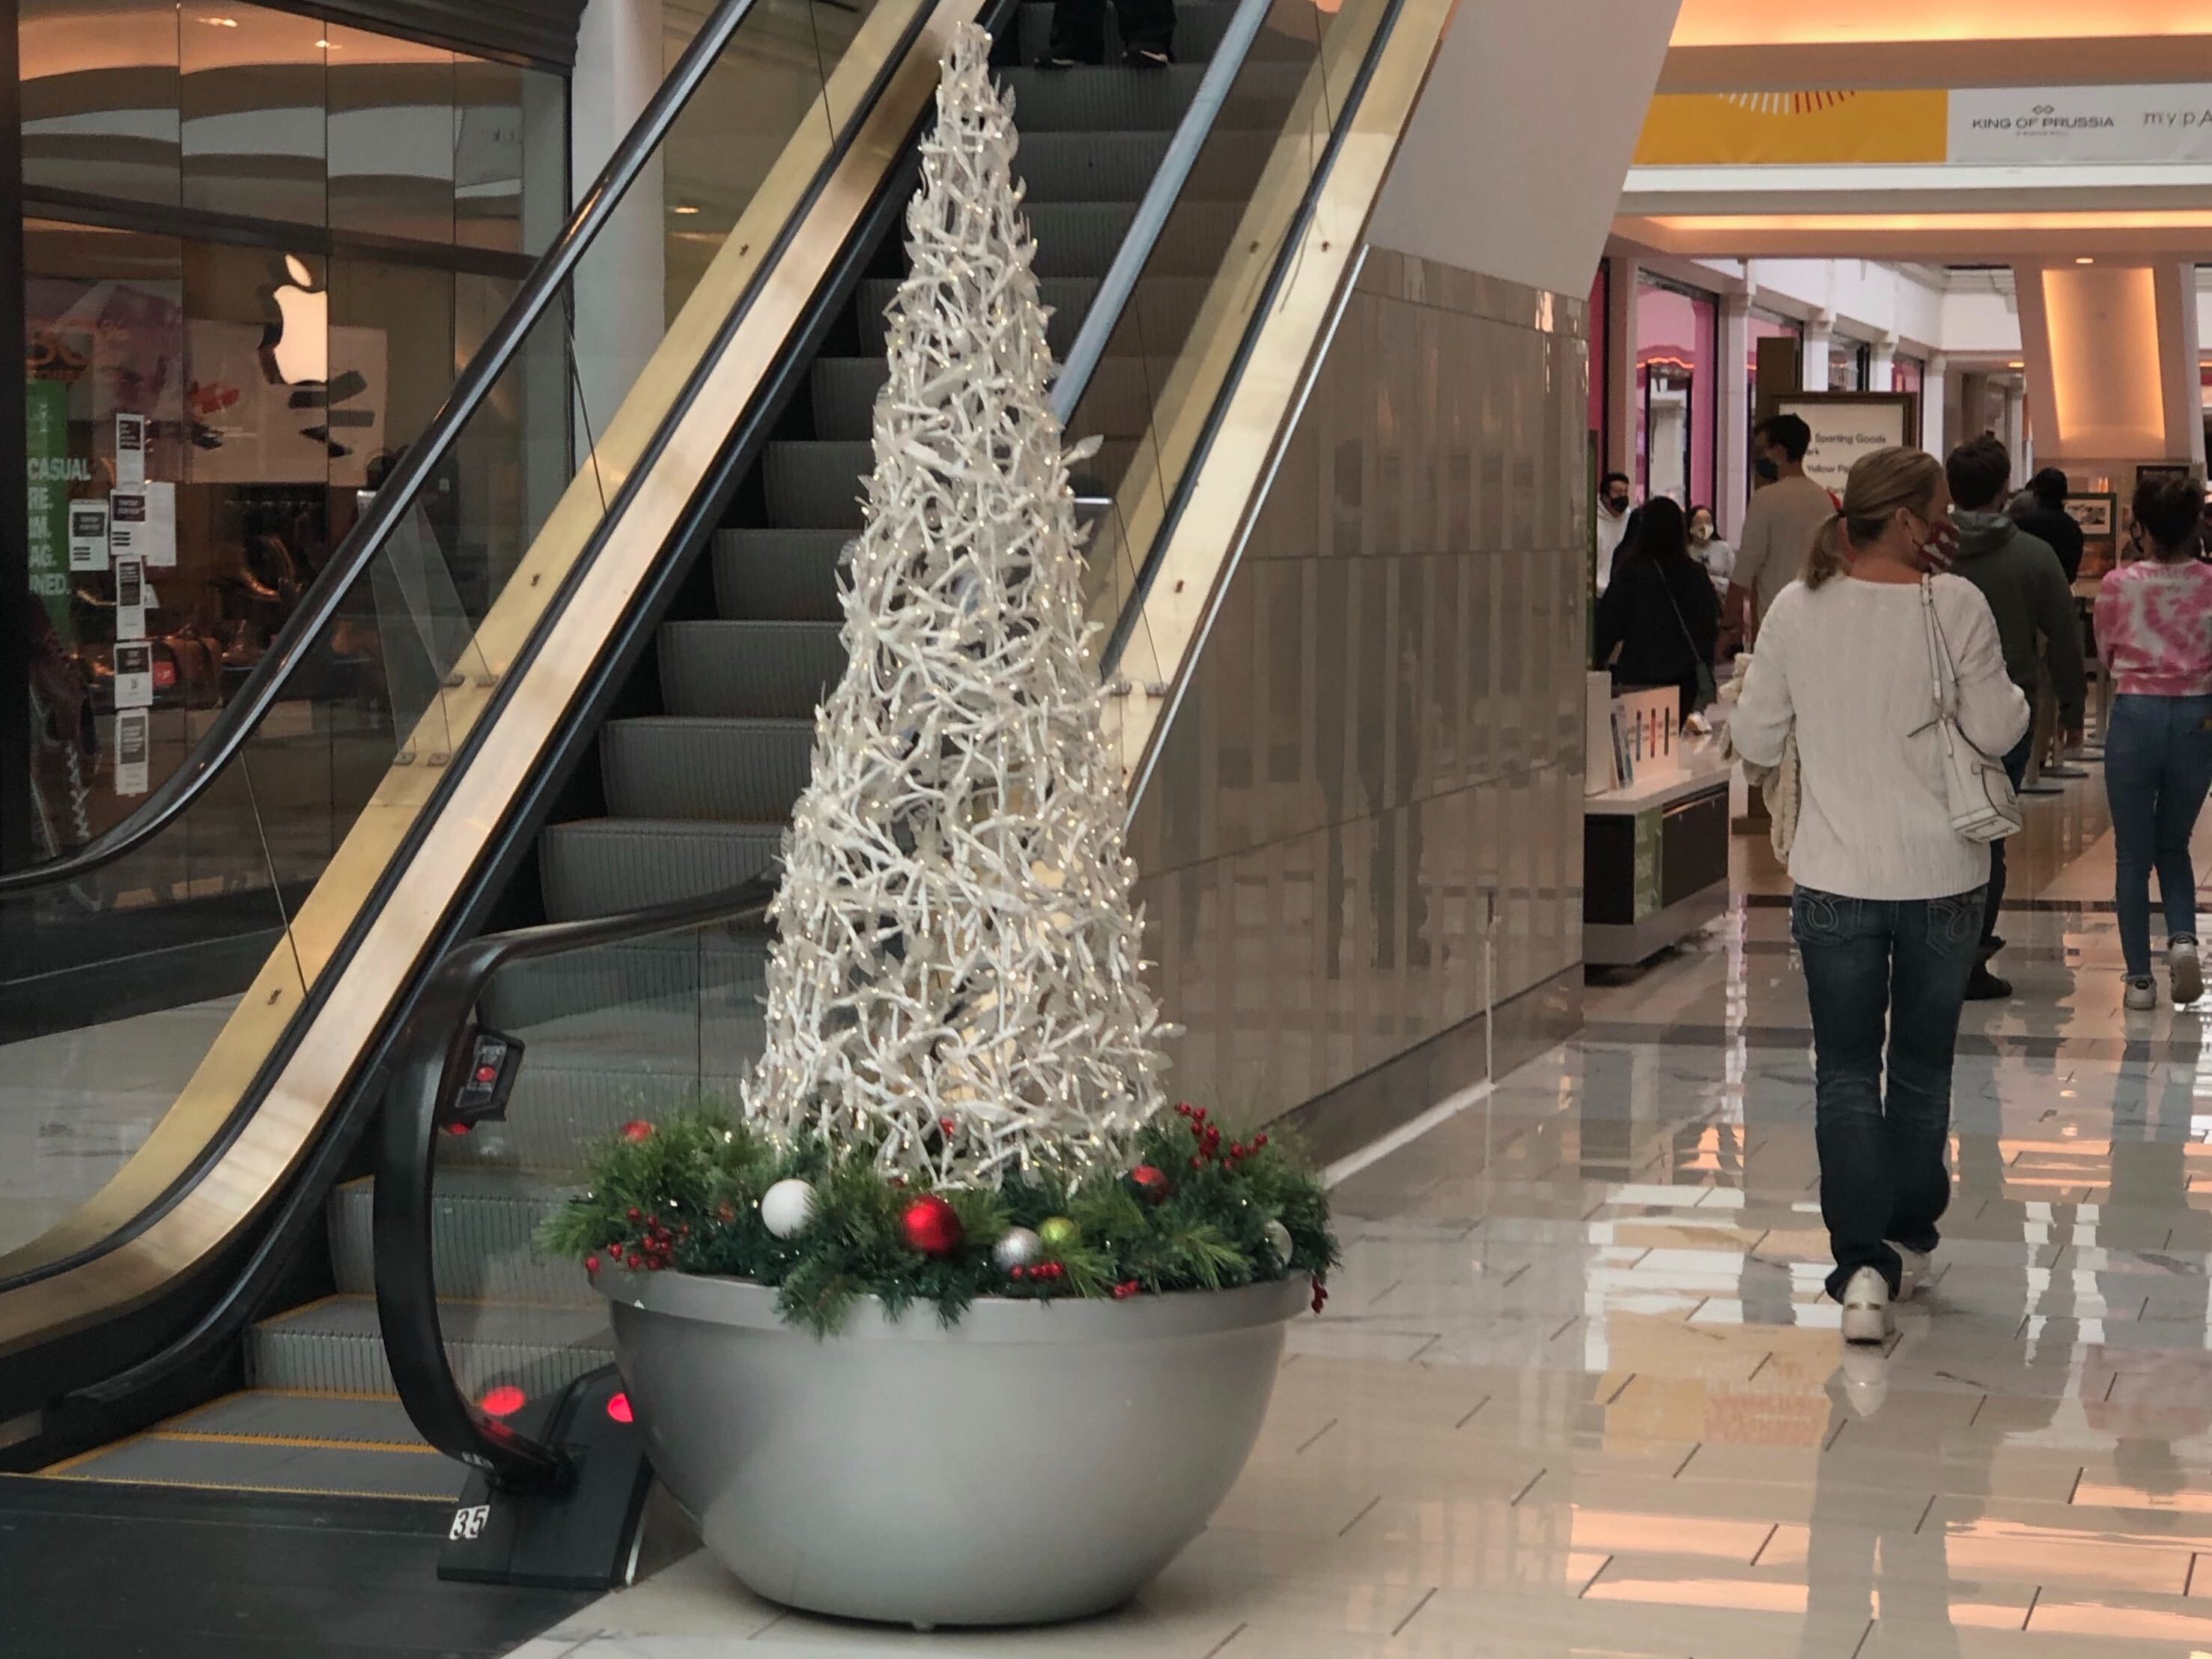 King of Prussia Mall to Close for Thanksgiving